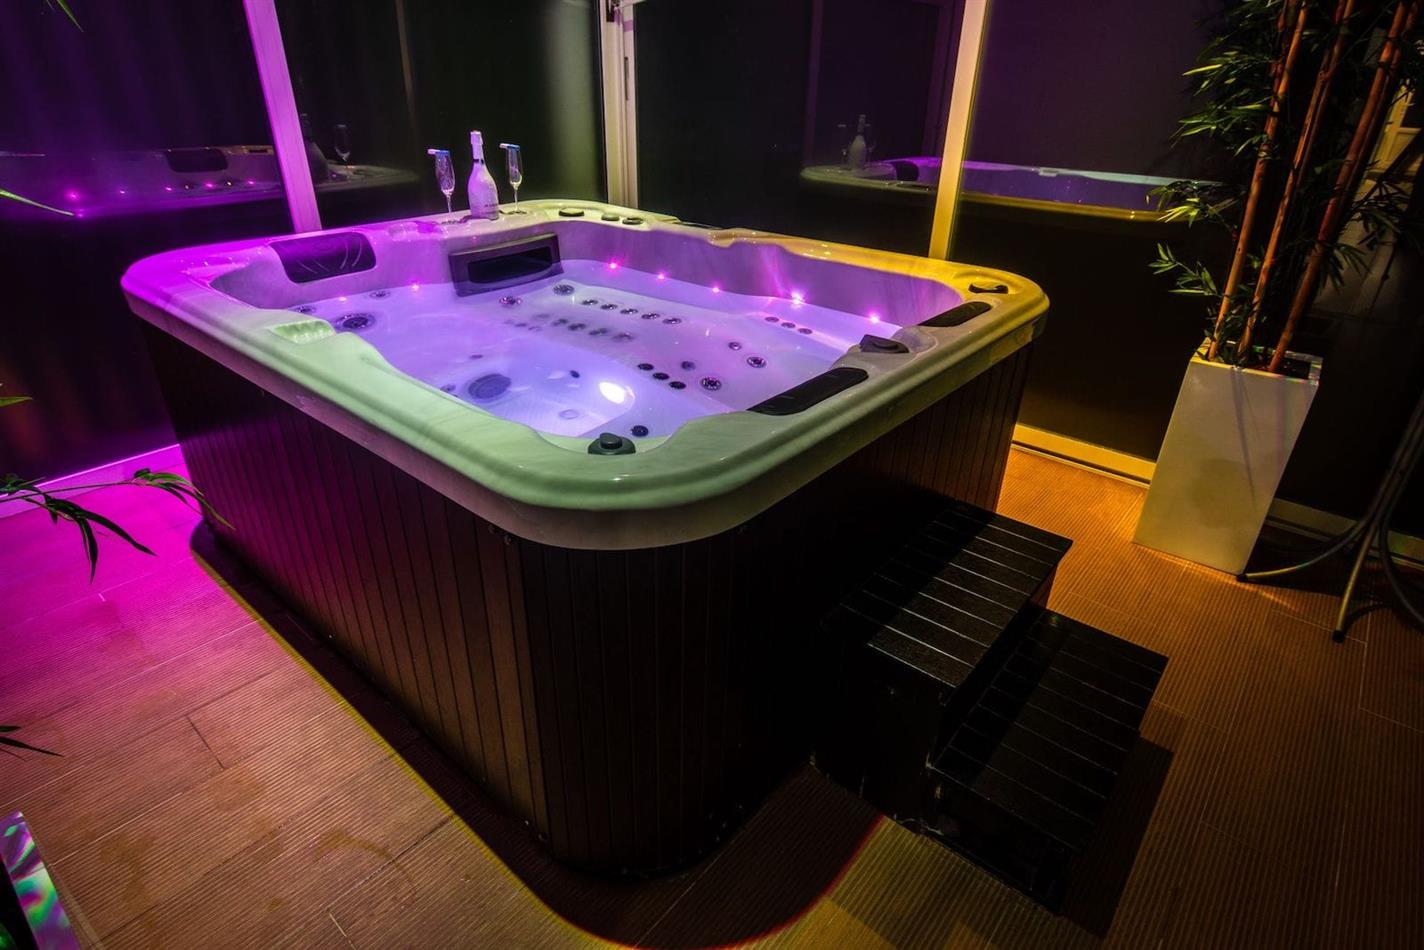 Jacuzzi for 2 persons, 120 min